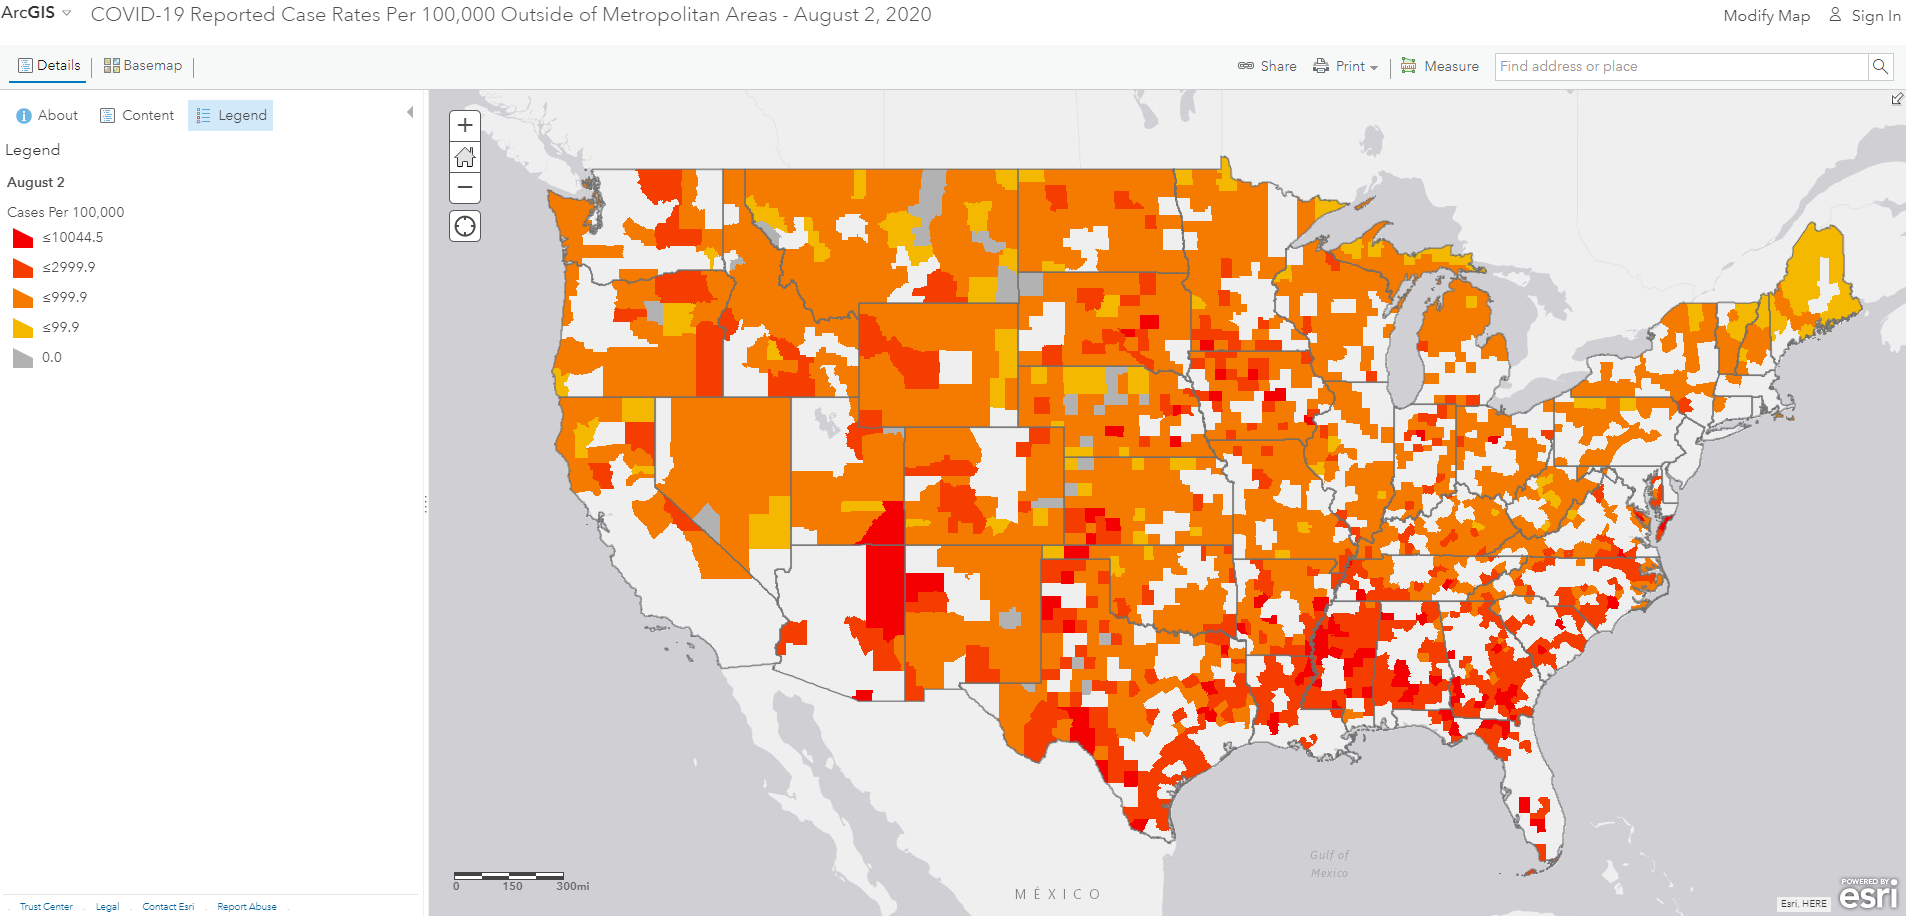 Covid-19 Reported Cases per 100,000 population - August 2, 2020